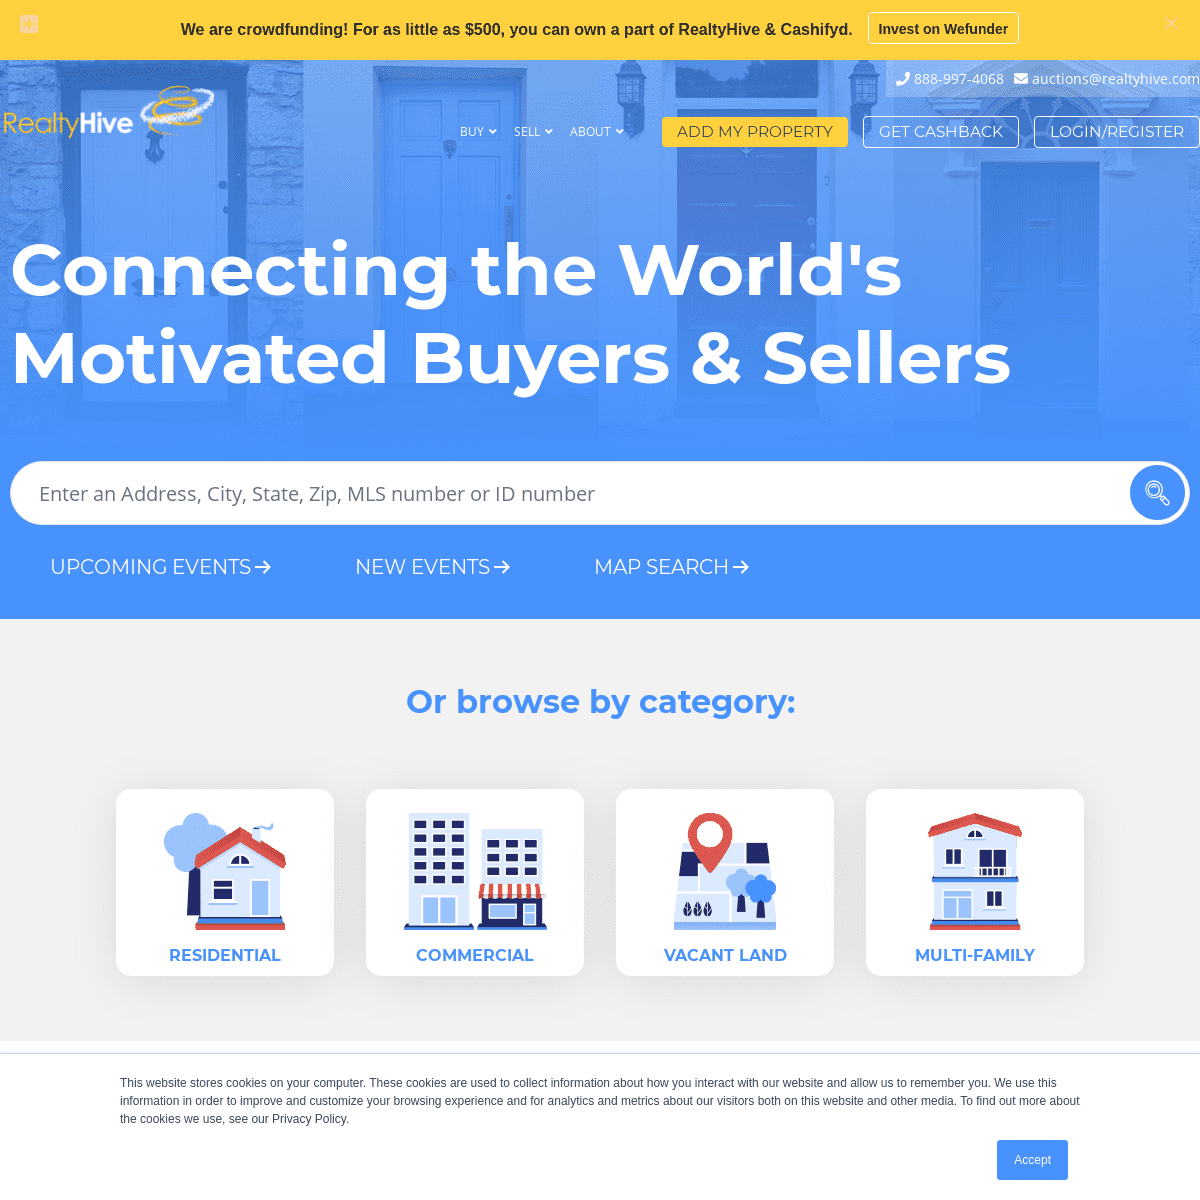 A complete backup of https://realtyhive.com